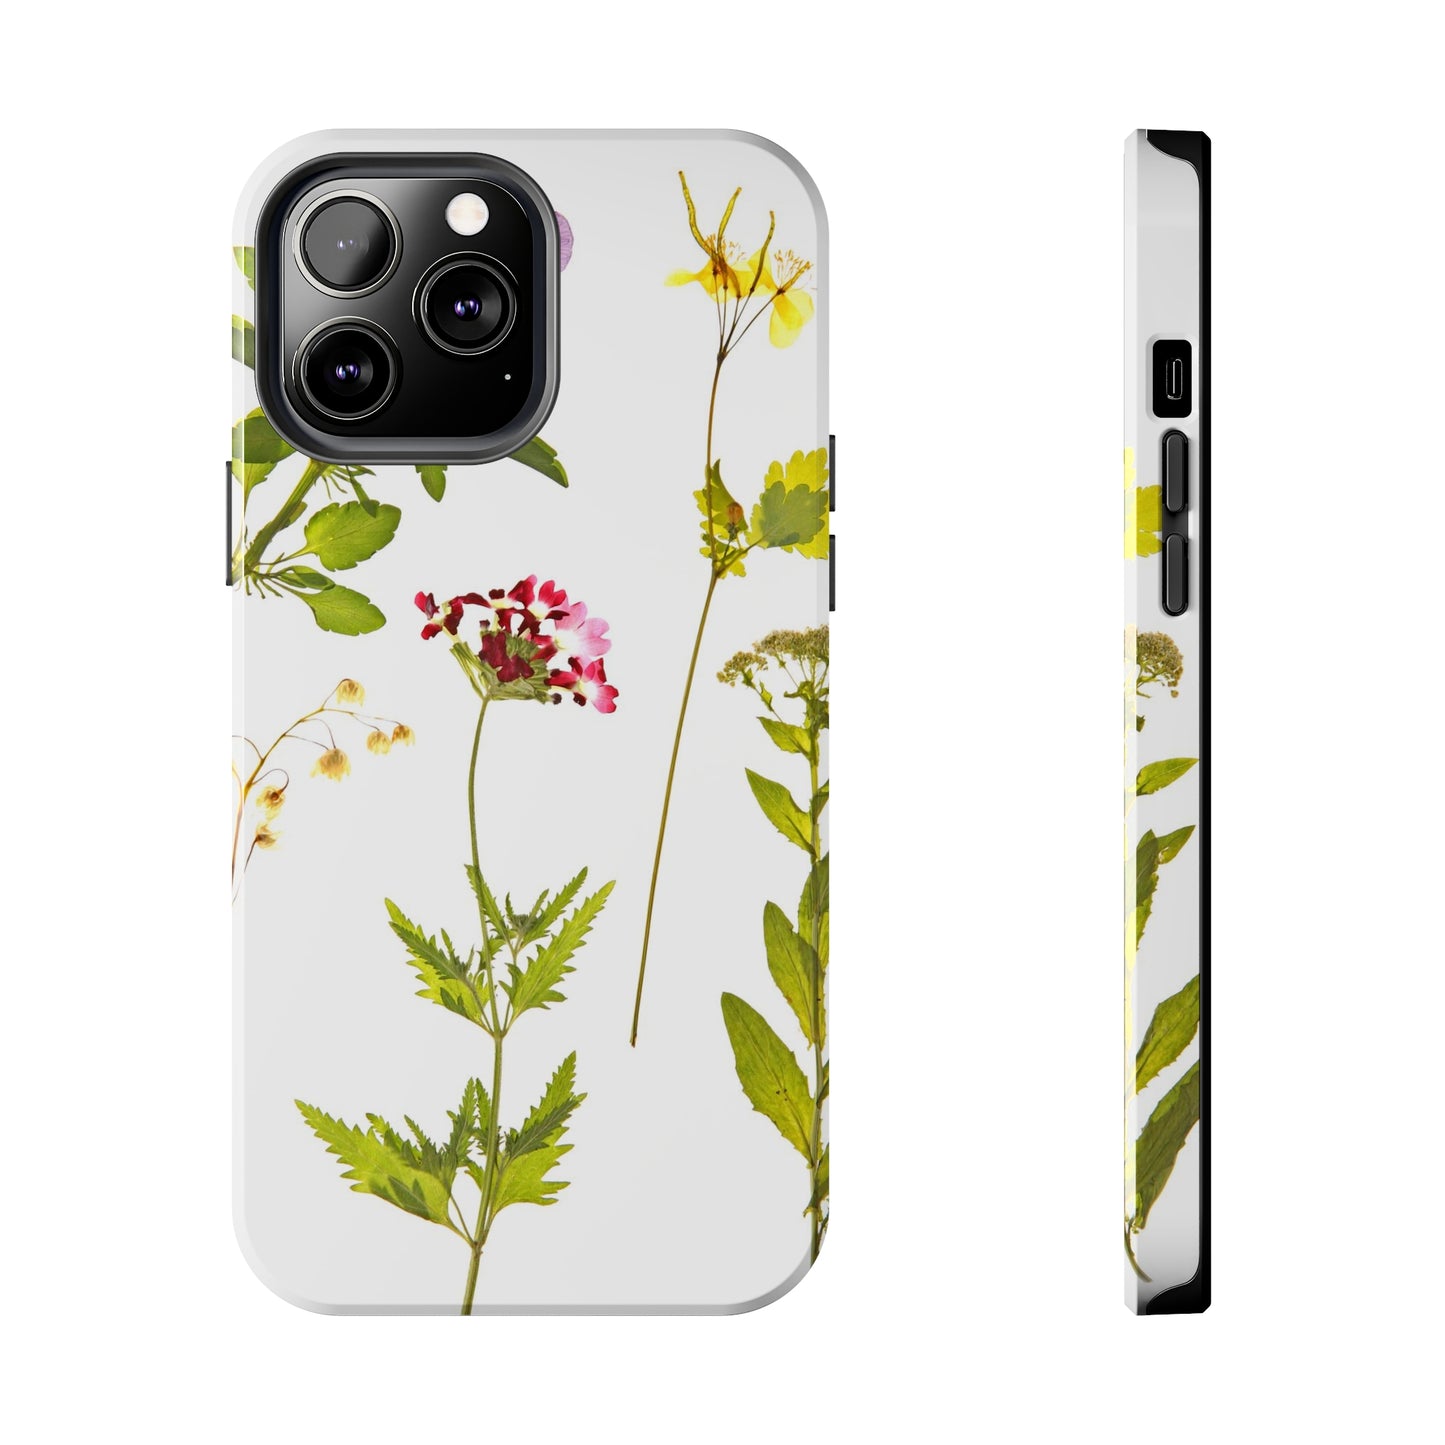 Wild Flowers Only / iPhone Case